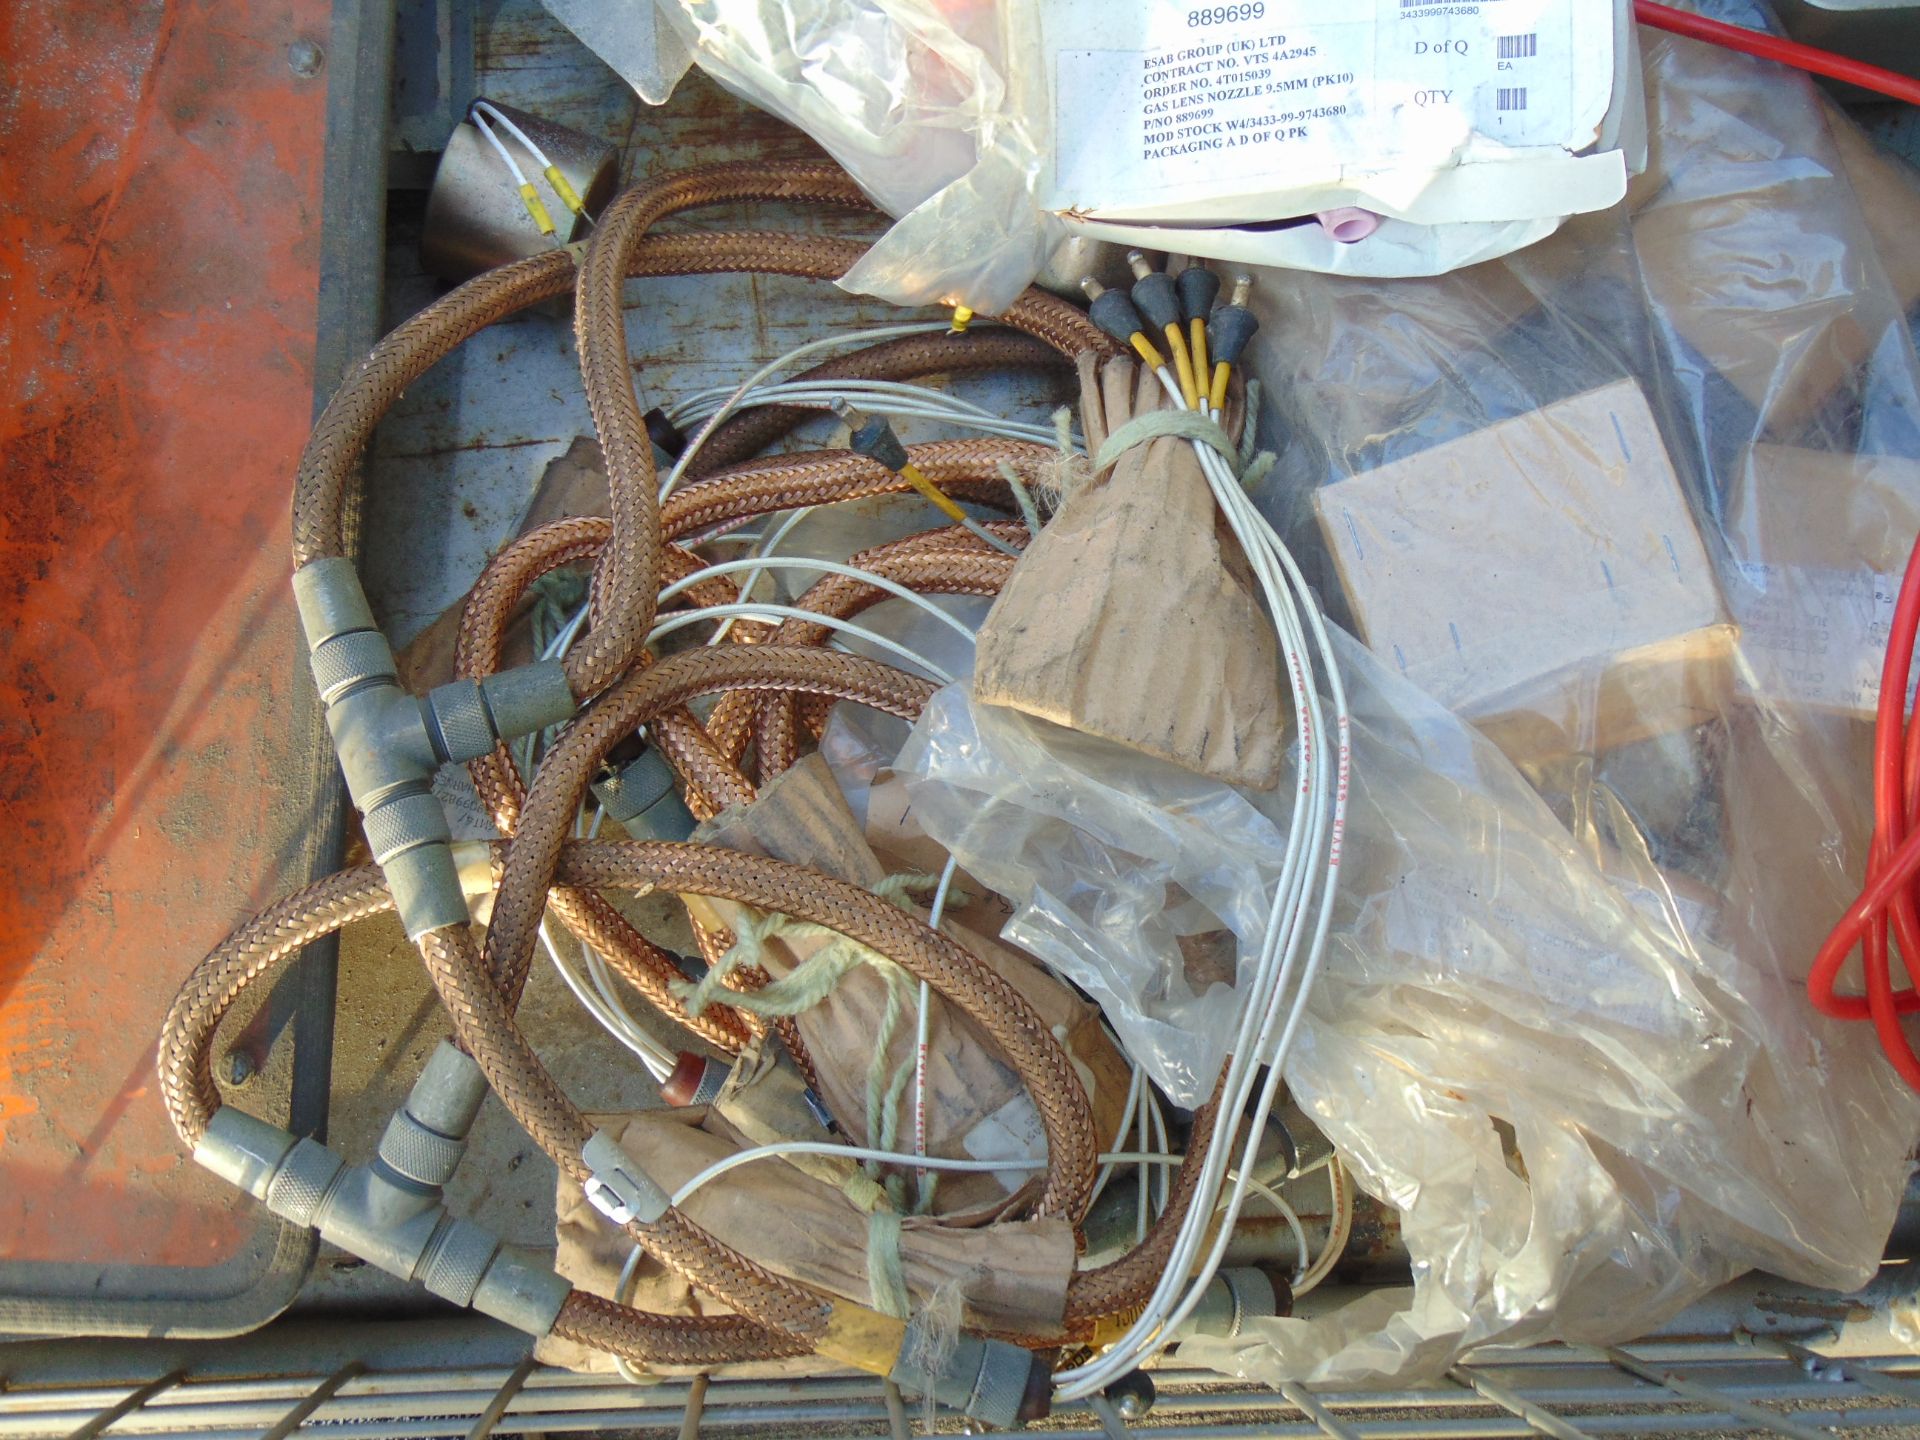 1X STILLAGE OF VEHICLES SPARES INCLUDING ANTENNA BASES, WIRING HARNESS, MARKER BOARDS, ETC,ETC - Image 7 of 8